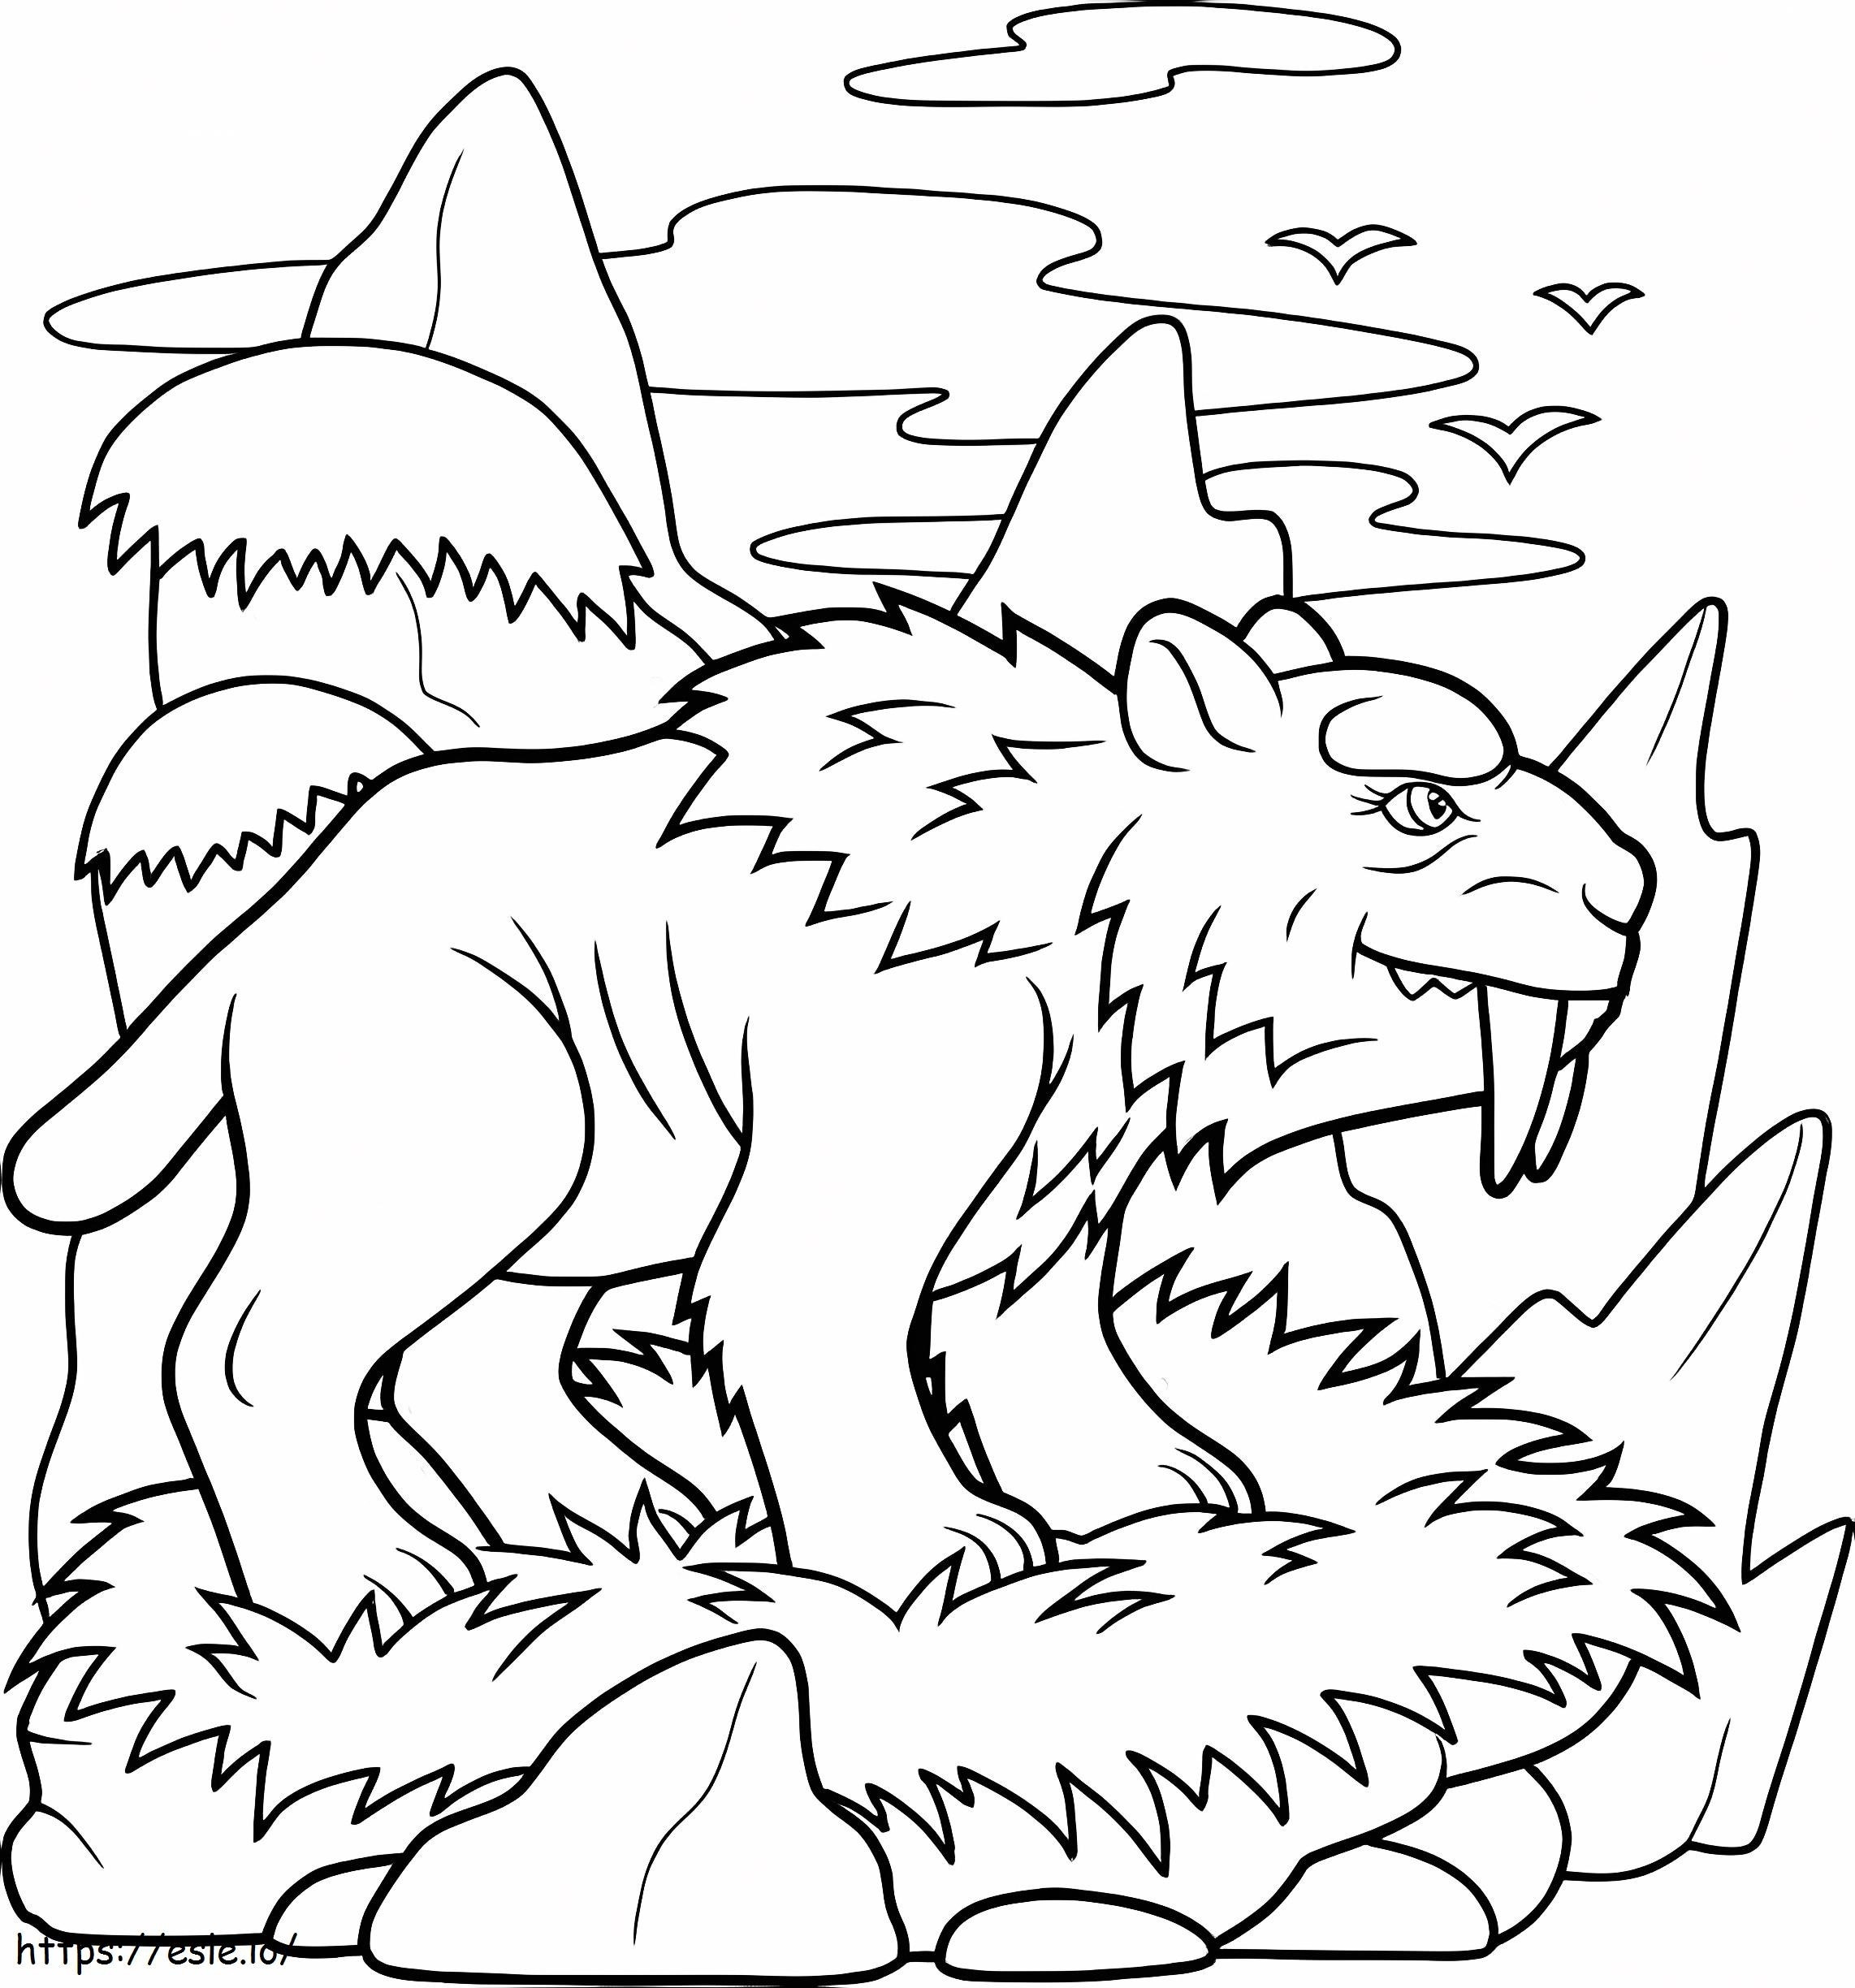 Stone Age Tiger coloring page